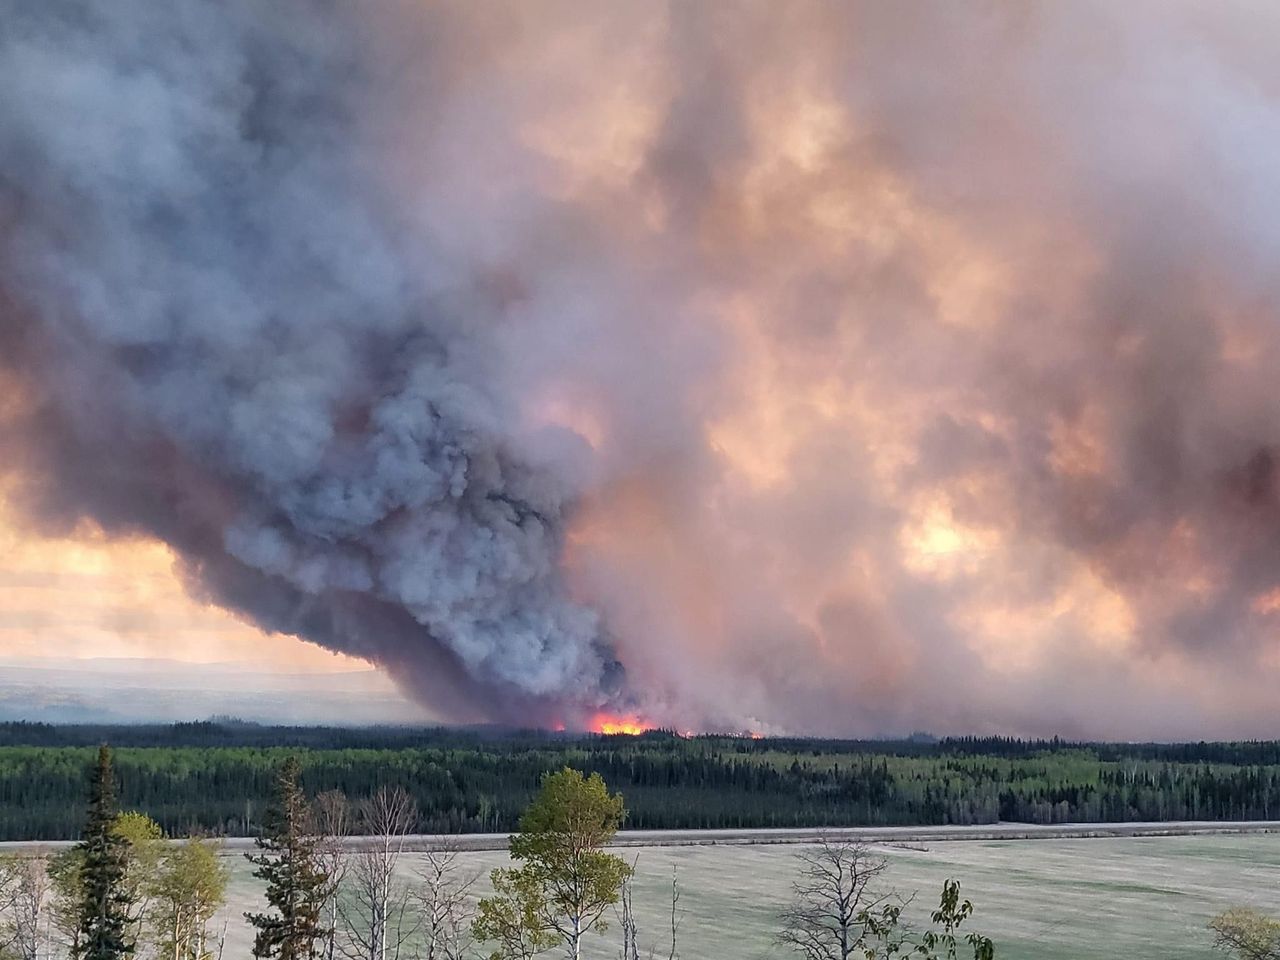 FORT NELSON, BRITISH COLUMBIA, CANADA - MAY 14: Smoke rises after fire erupts in Western Canada on May 14, 2024. Wildfires in Western Canada prompted thousands to flee their homes, while 66,000 were on standby to evacuate as a fast-moving blaze threatened another community Saturday. A growing wildfire moved relentlessly toward Fort Nelson, British Columbia (B.C.), resulting in officials ordering more than 3,000 to leave their homes in Fort Nelson and nearby Fort Nelson First Nation.Within five hours, the fire had grown to 8 square kilometers. (3 square miles) from a modest half square kilometer.Tinder dry conditions and flames fanned by powerful winds caused the wildfire to spread and prompted the evacuation order, which was issued at 7.30 p.m. (Photo by Cheyenne Berreault/Anadolu via Getty Images)